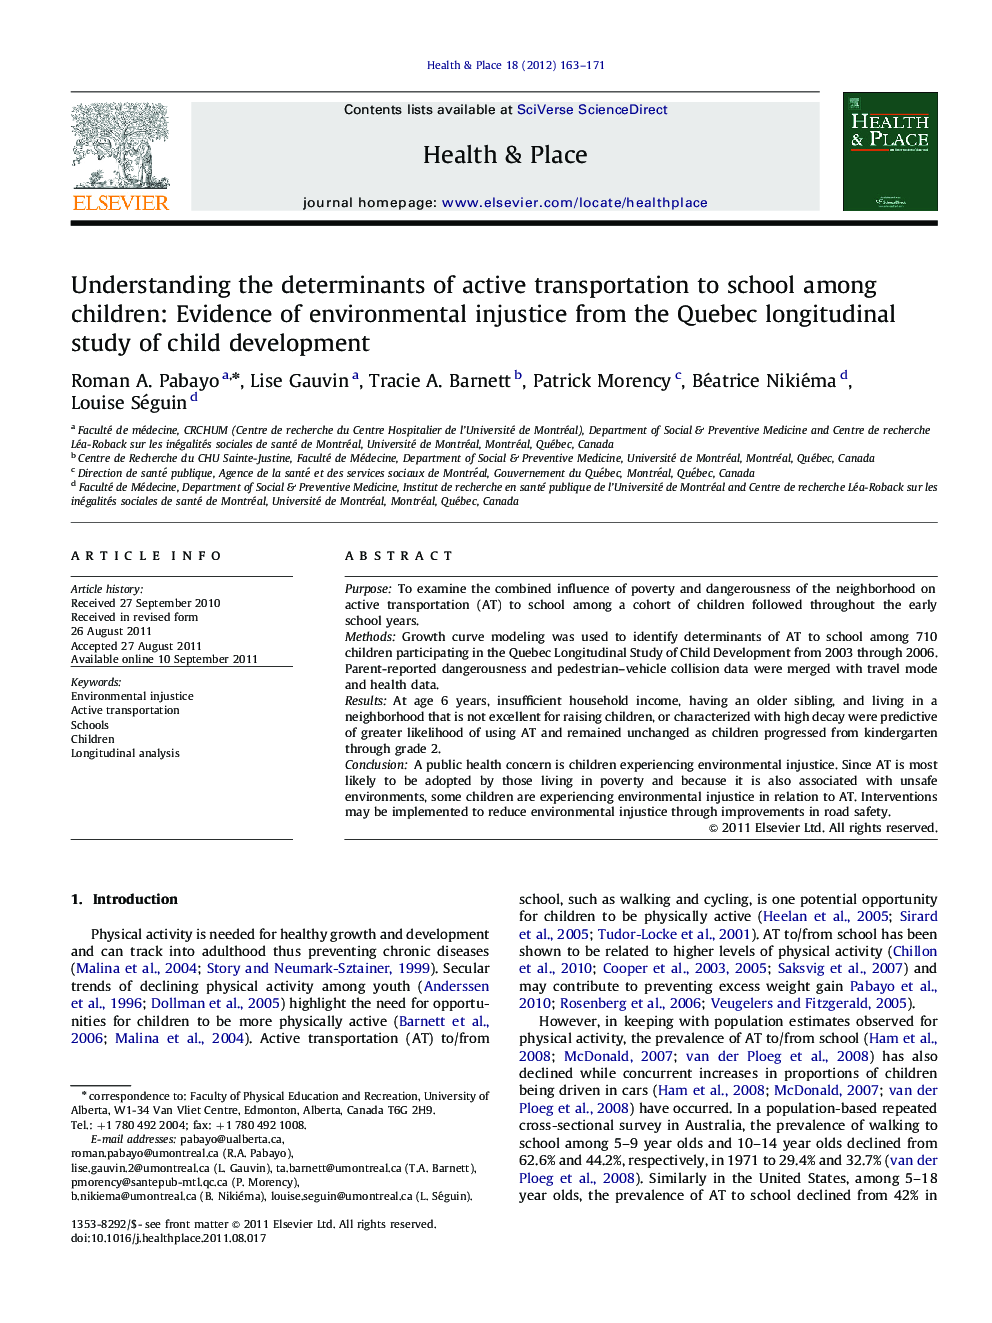 Understanding the determinants of active transportation to school among children: Evidence of environmental injustice from the Quebec longitudinal study of child development